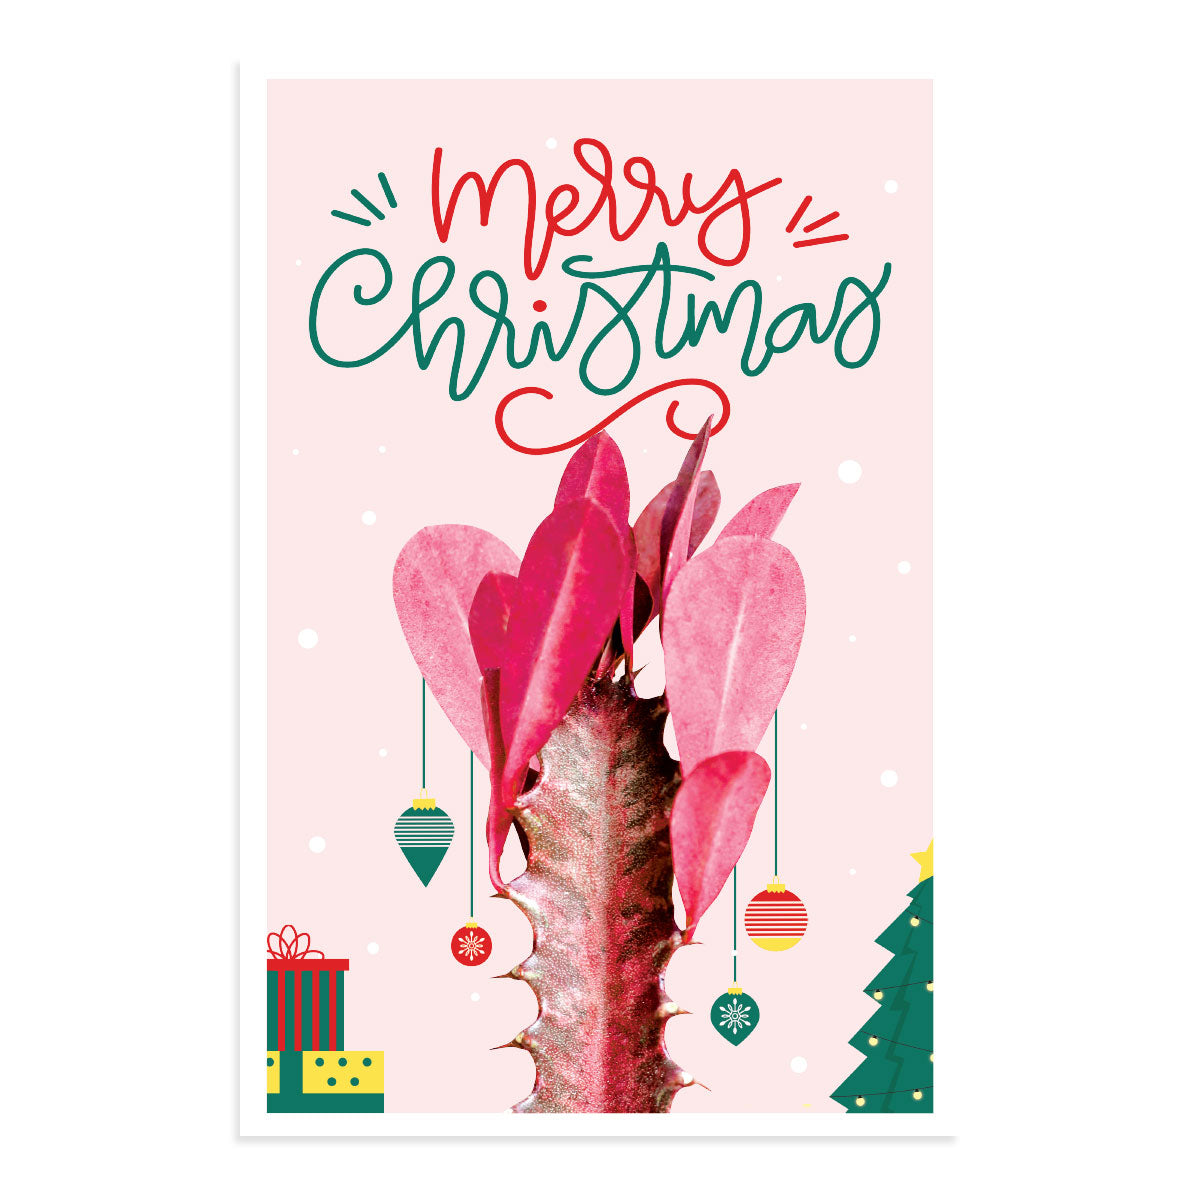 Christmas Cards 2023, Holiday Cards, Personalized Christmas cards 2023, Unique Christmas Cards by Succulents Box, The best places to buy holiday cards online in 2023, Christmas Succulents, Christmas Succulent Plants, Succulents for Christmas Ideas in 2023, Succulent Christmas Decorations, Succulent Christmas Gift Ideas, Christmas Gift Ideas for Succulent Lovers, Holiday Succulent Planter, Holiday Decorating with Succulents